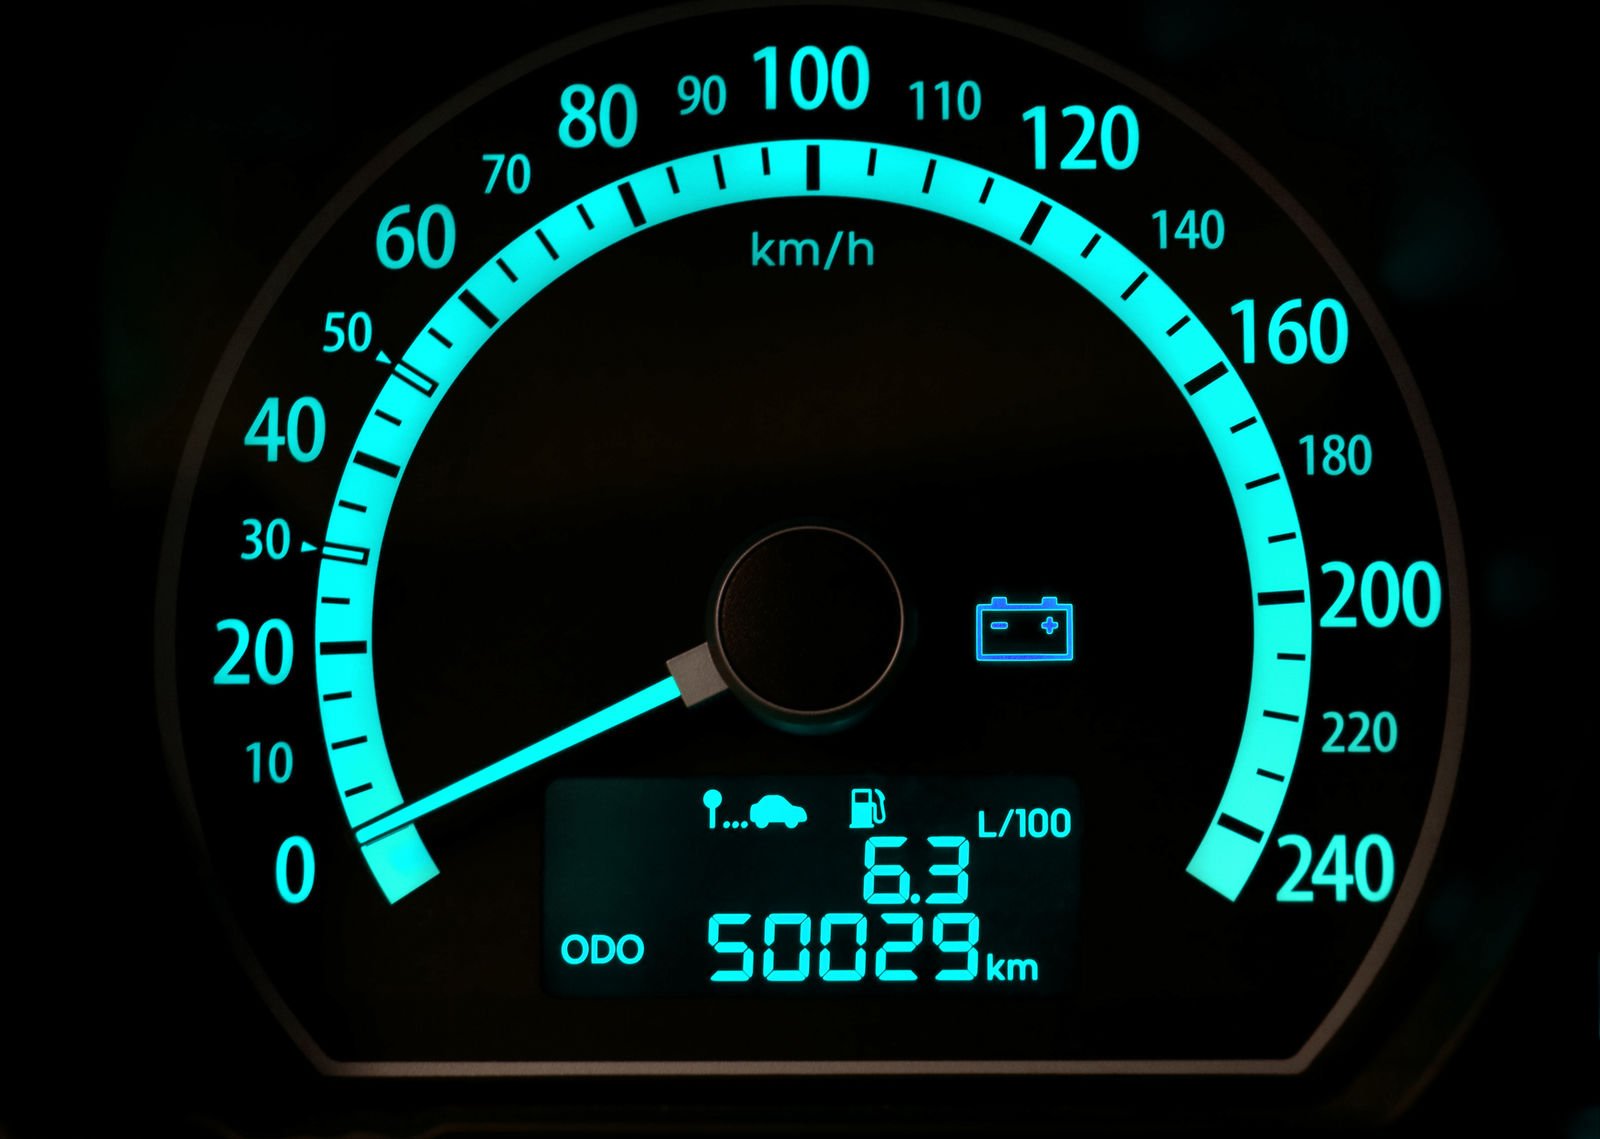 Does your annual mileage affect car insurance?